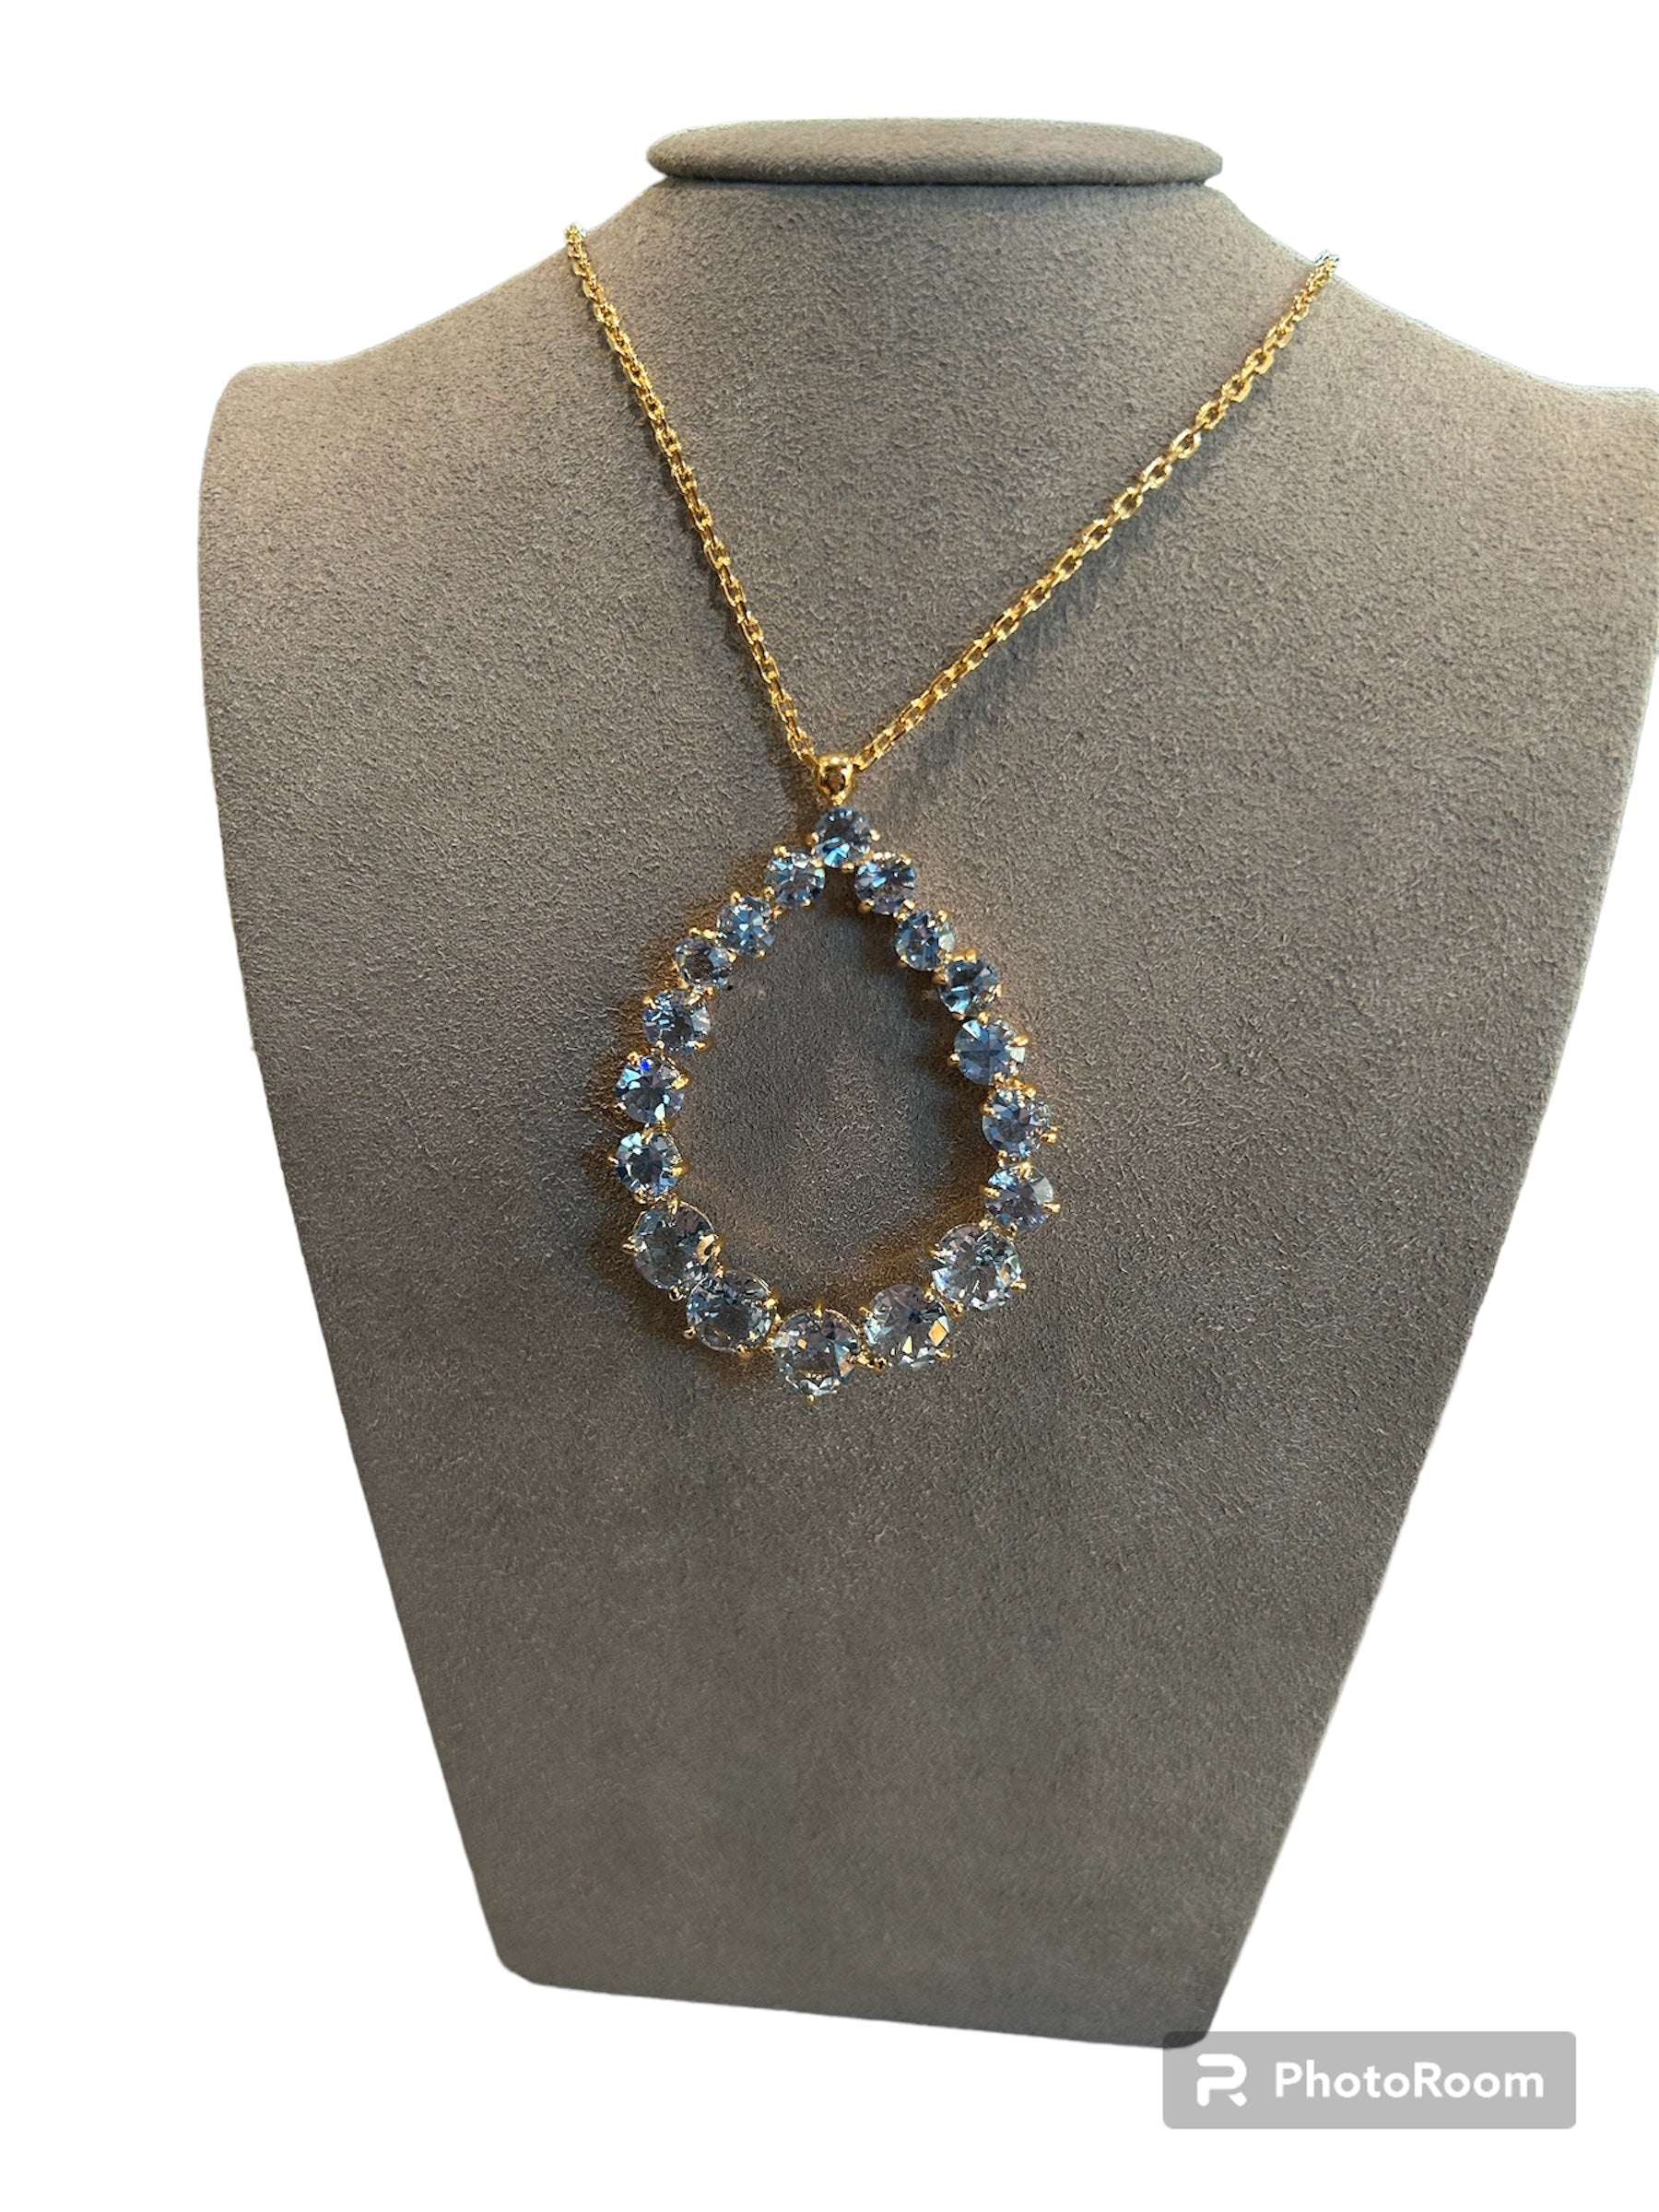 IL Mio Re - Gilded bronze necklace with pendant medallion with blue stones - ILMIORE CL 046